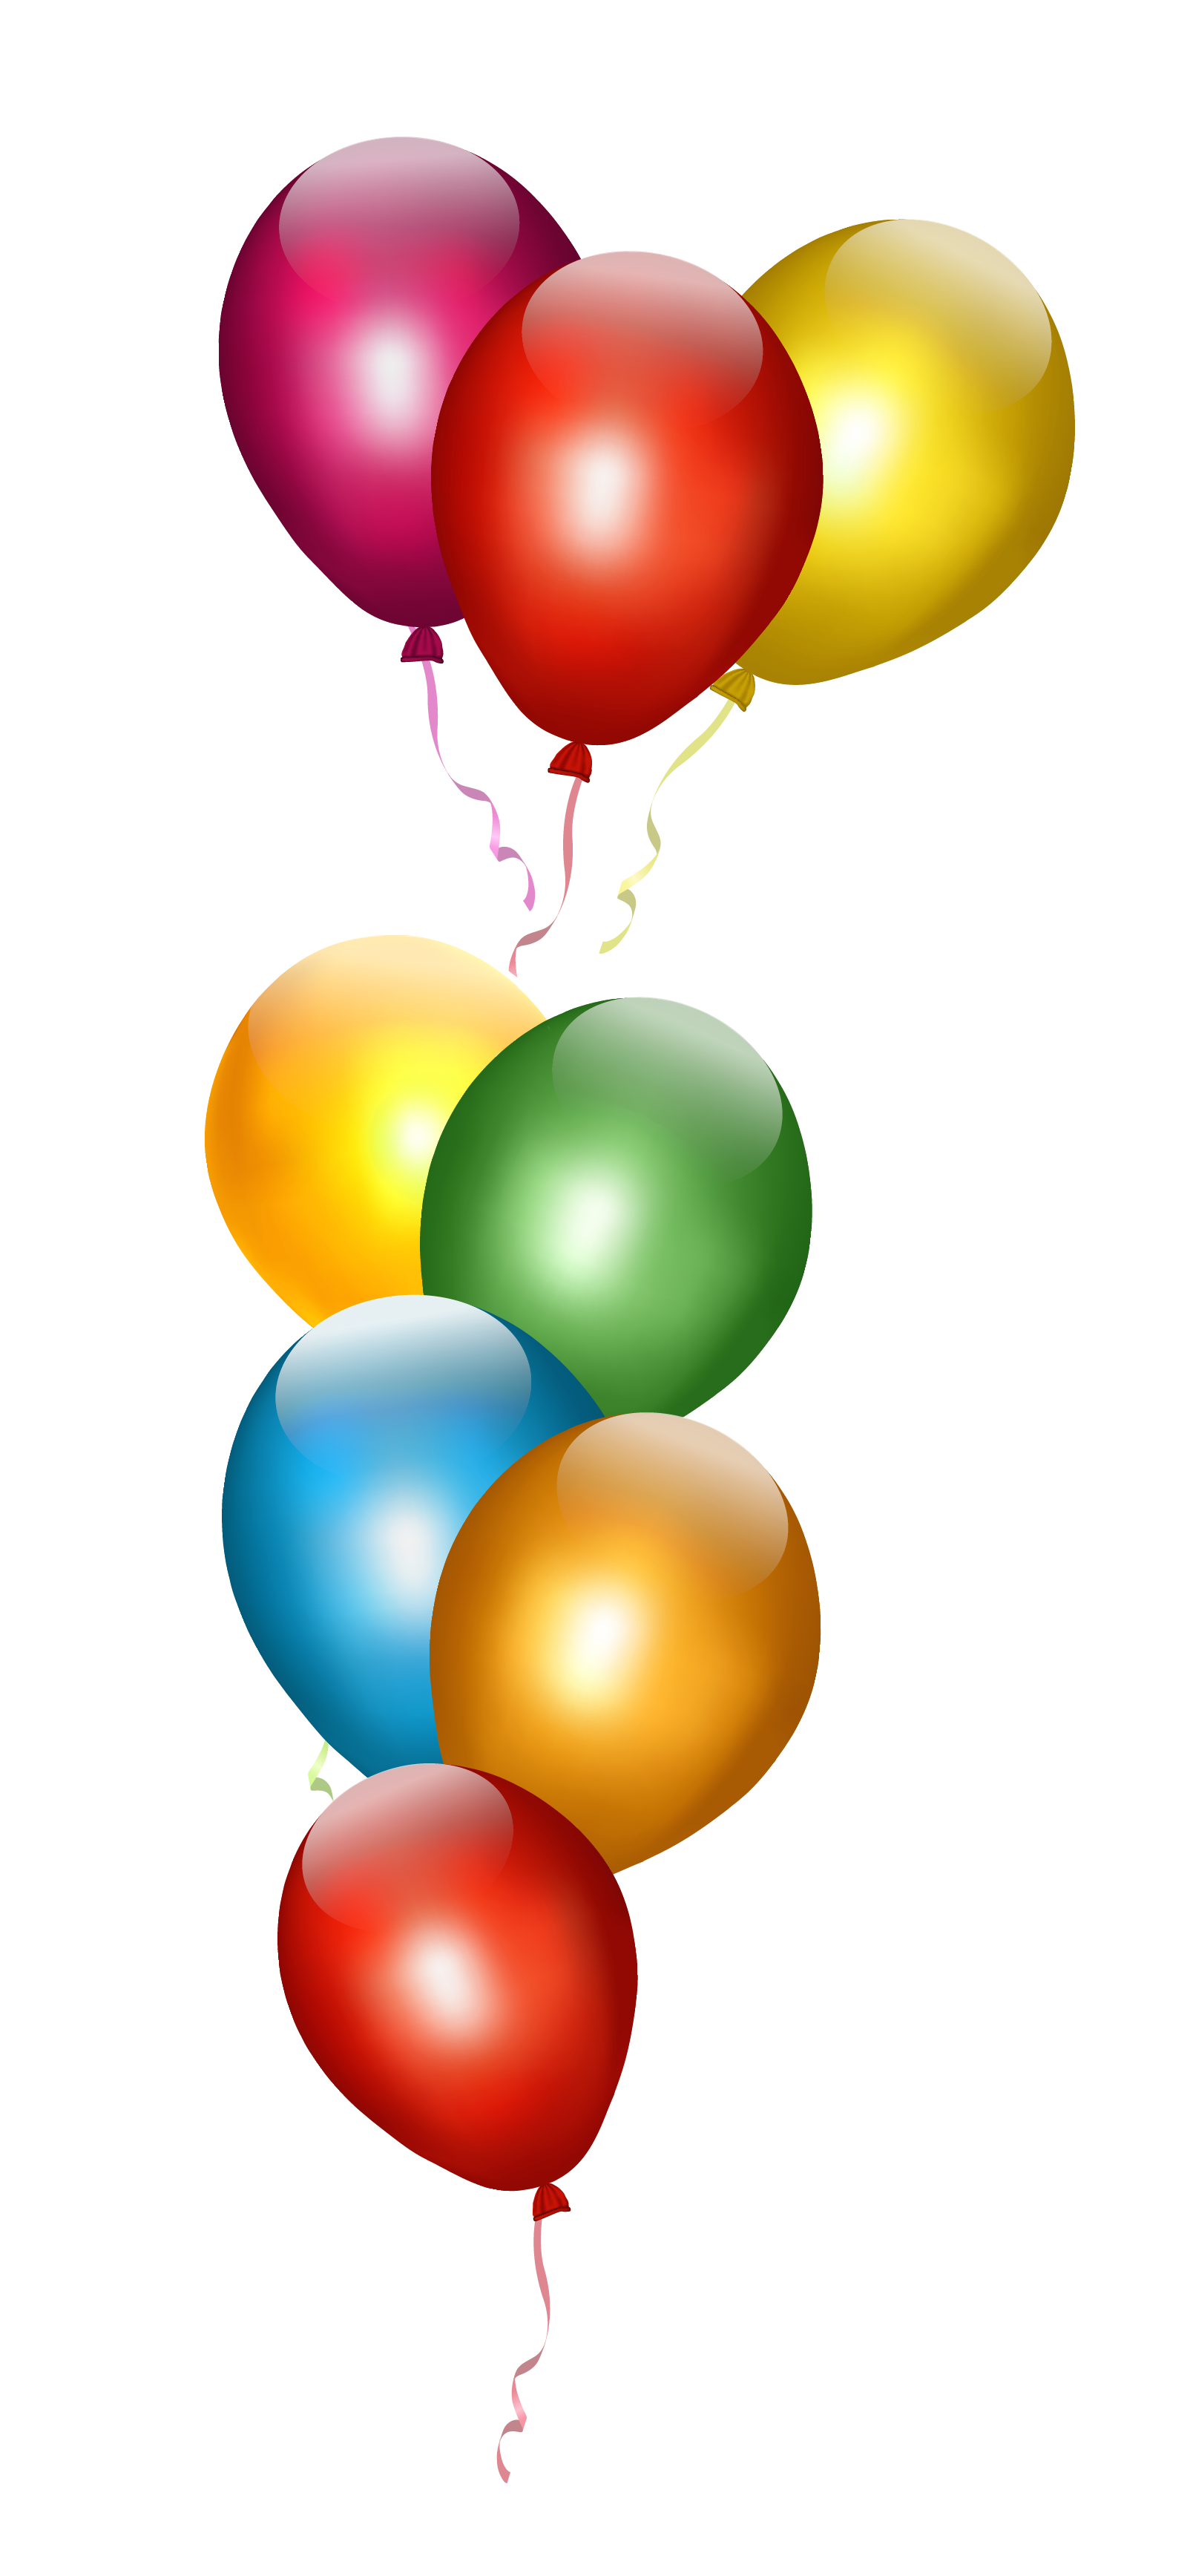 Party Toy balloon Birthday Gift - Transparent Balloons png download